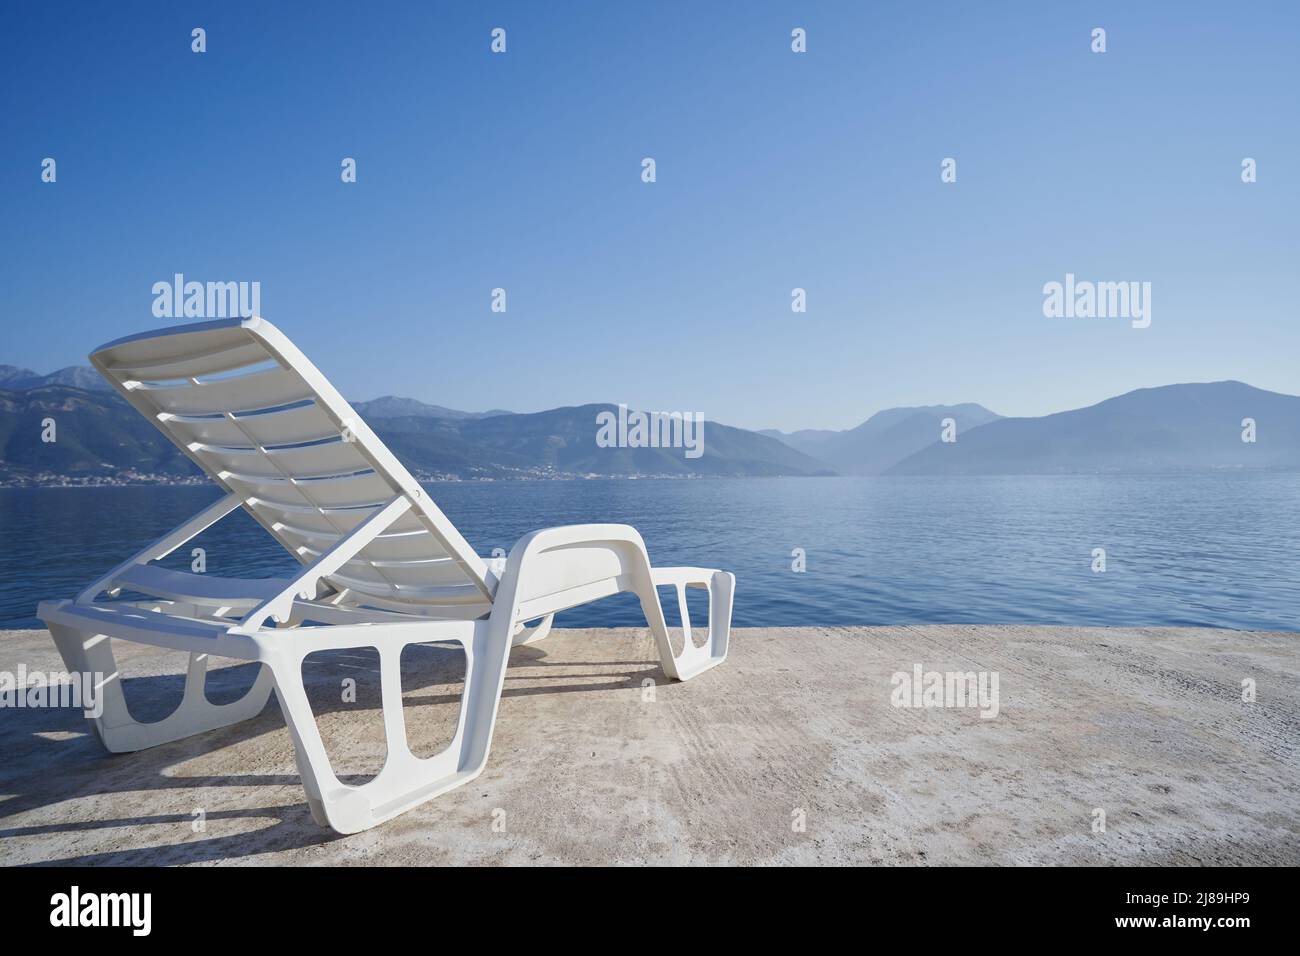 Plastic beach chair against sea and mountains, travel concept Stock Photo